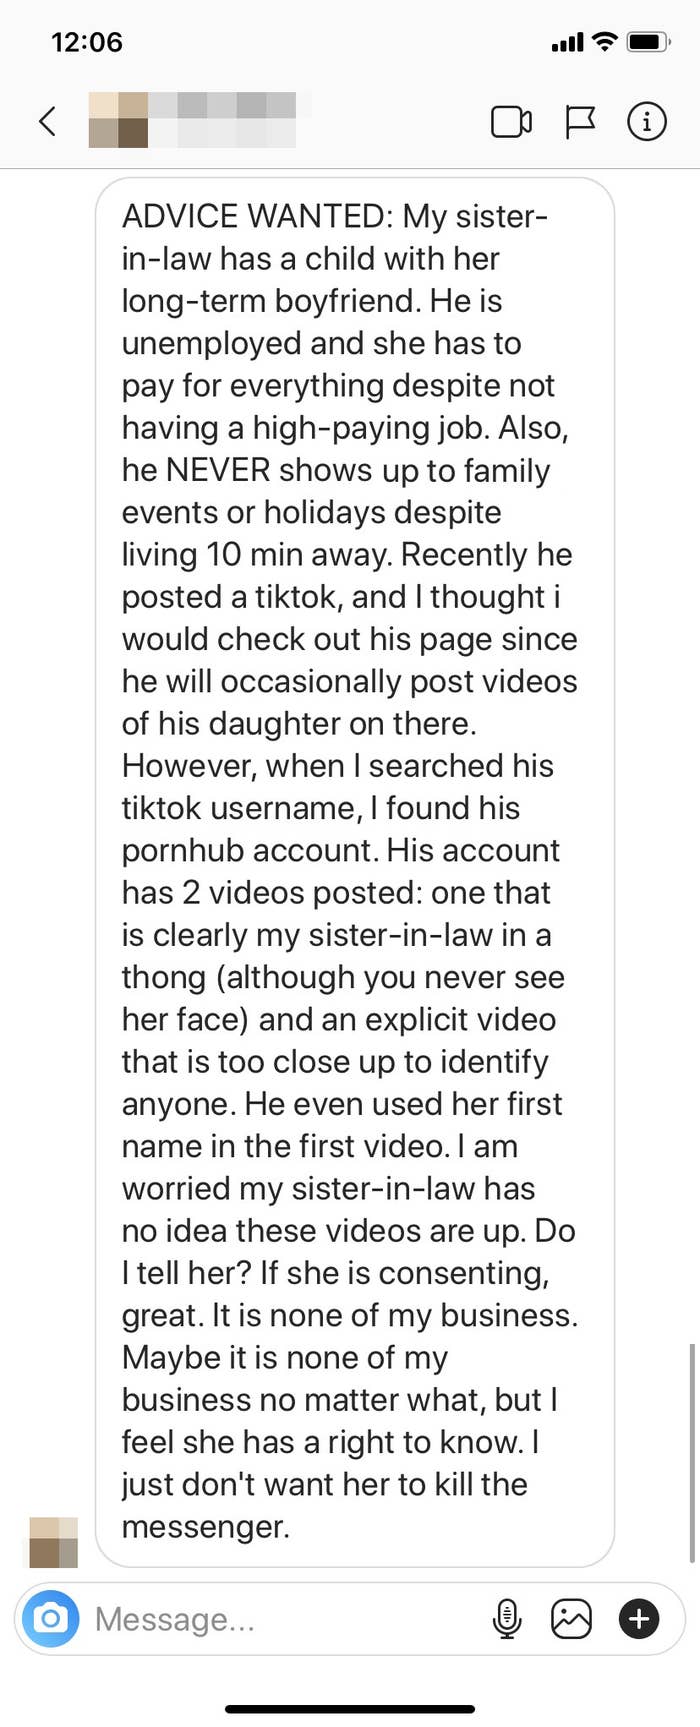 Screenshot of an Instagram DM: A woman stumbled upon a video of her sister-in-law on PornHub. The boyfriend has a history of shitty behavior, and the letter writer suspects that maybe the sister-in-law doesn&#x27;t know about these videos. Should she tell her?